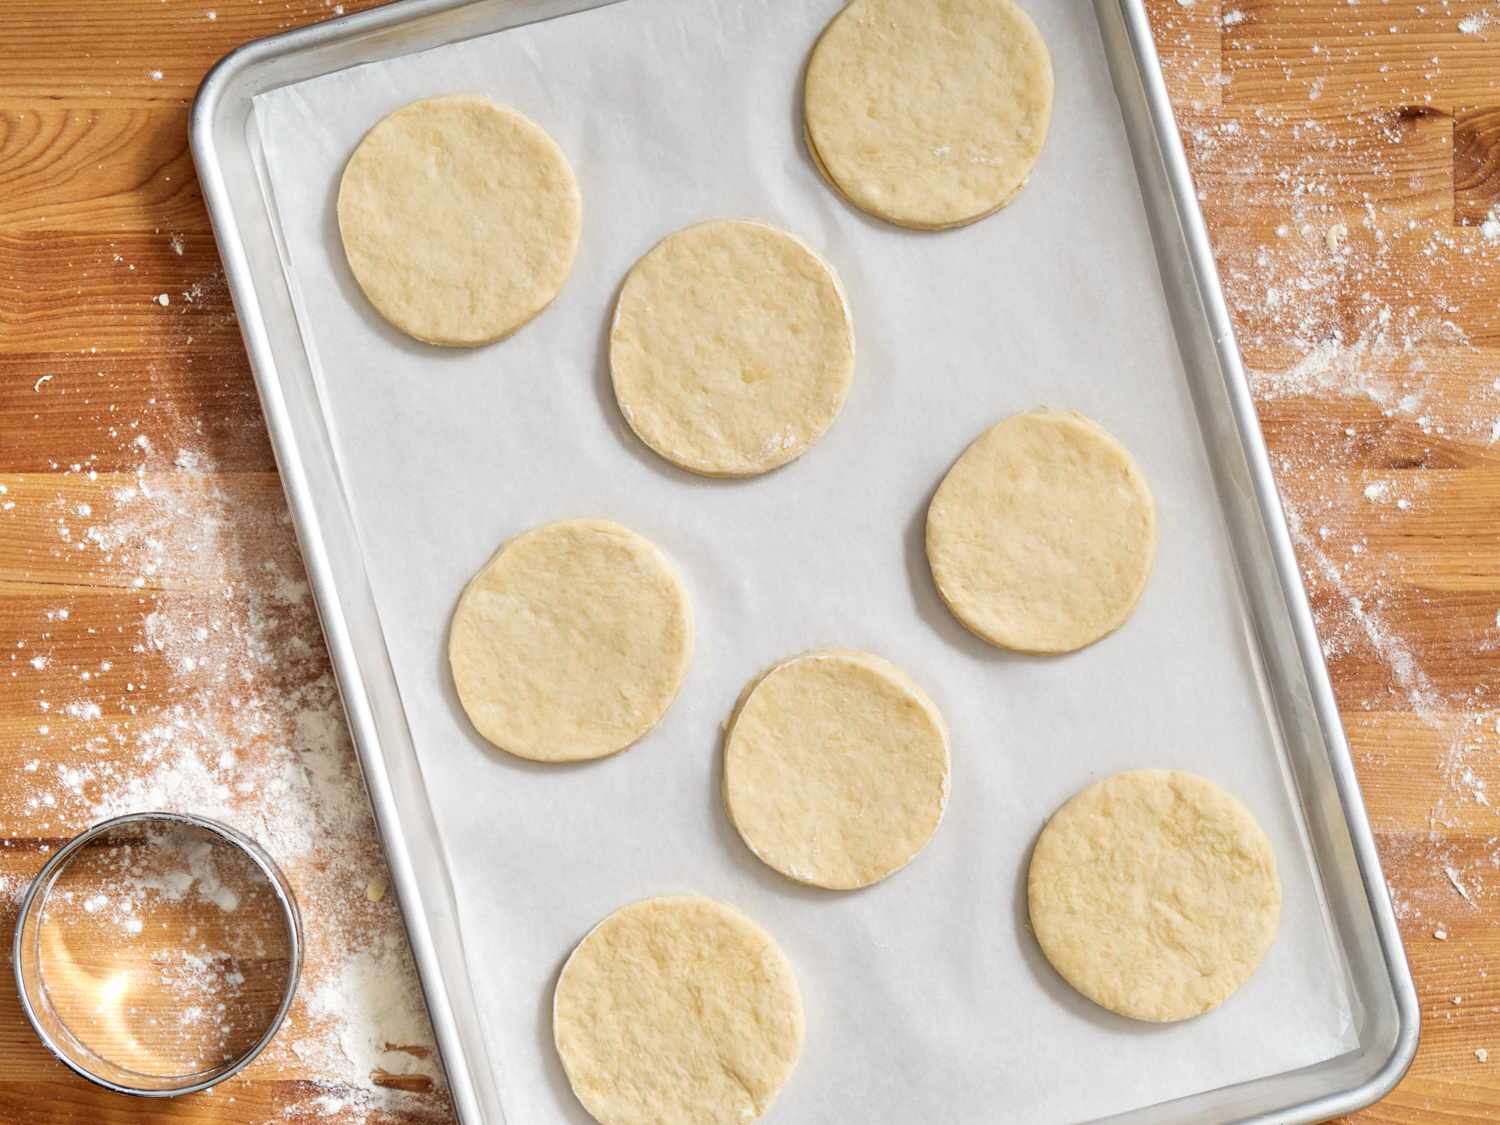 A baking sheet with cut out circles of biscuit dough.